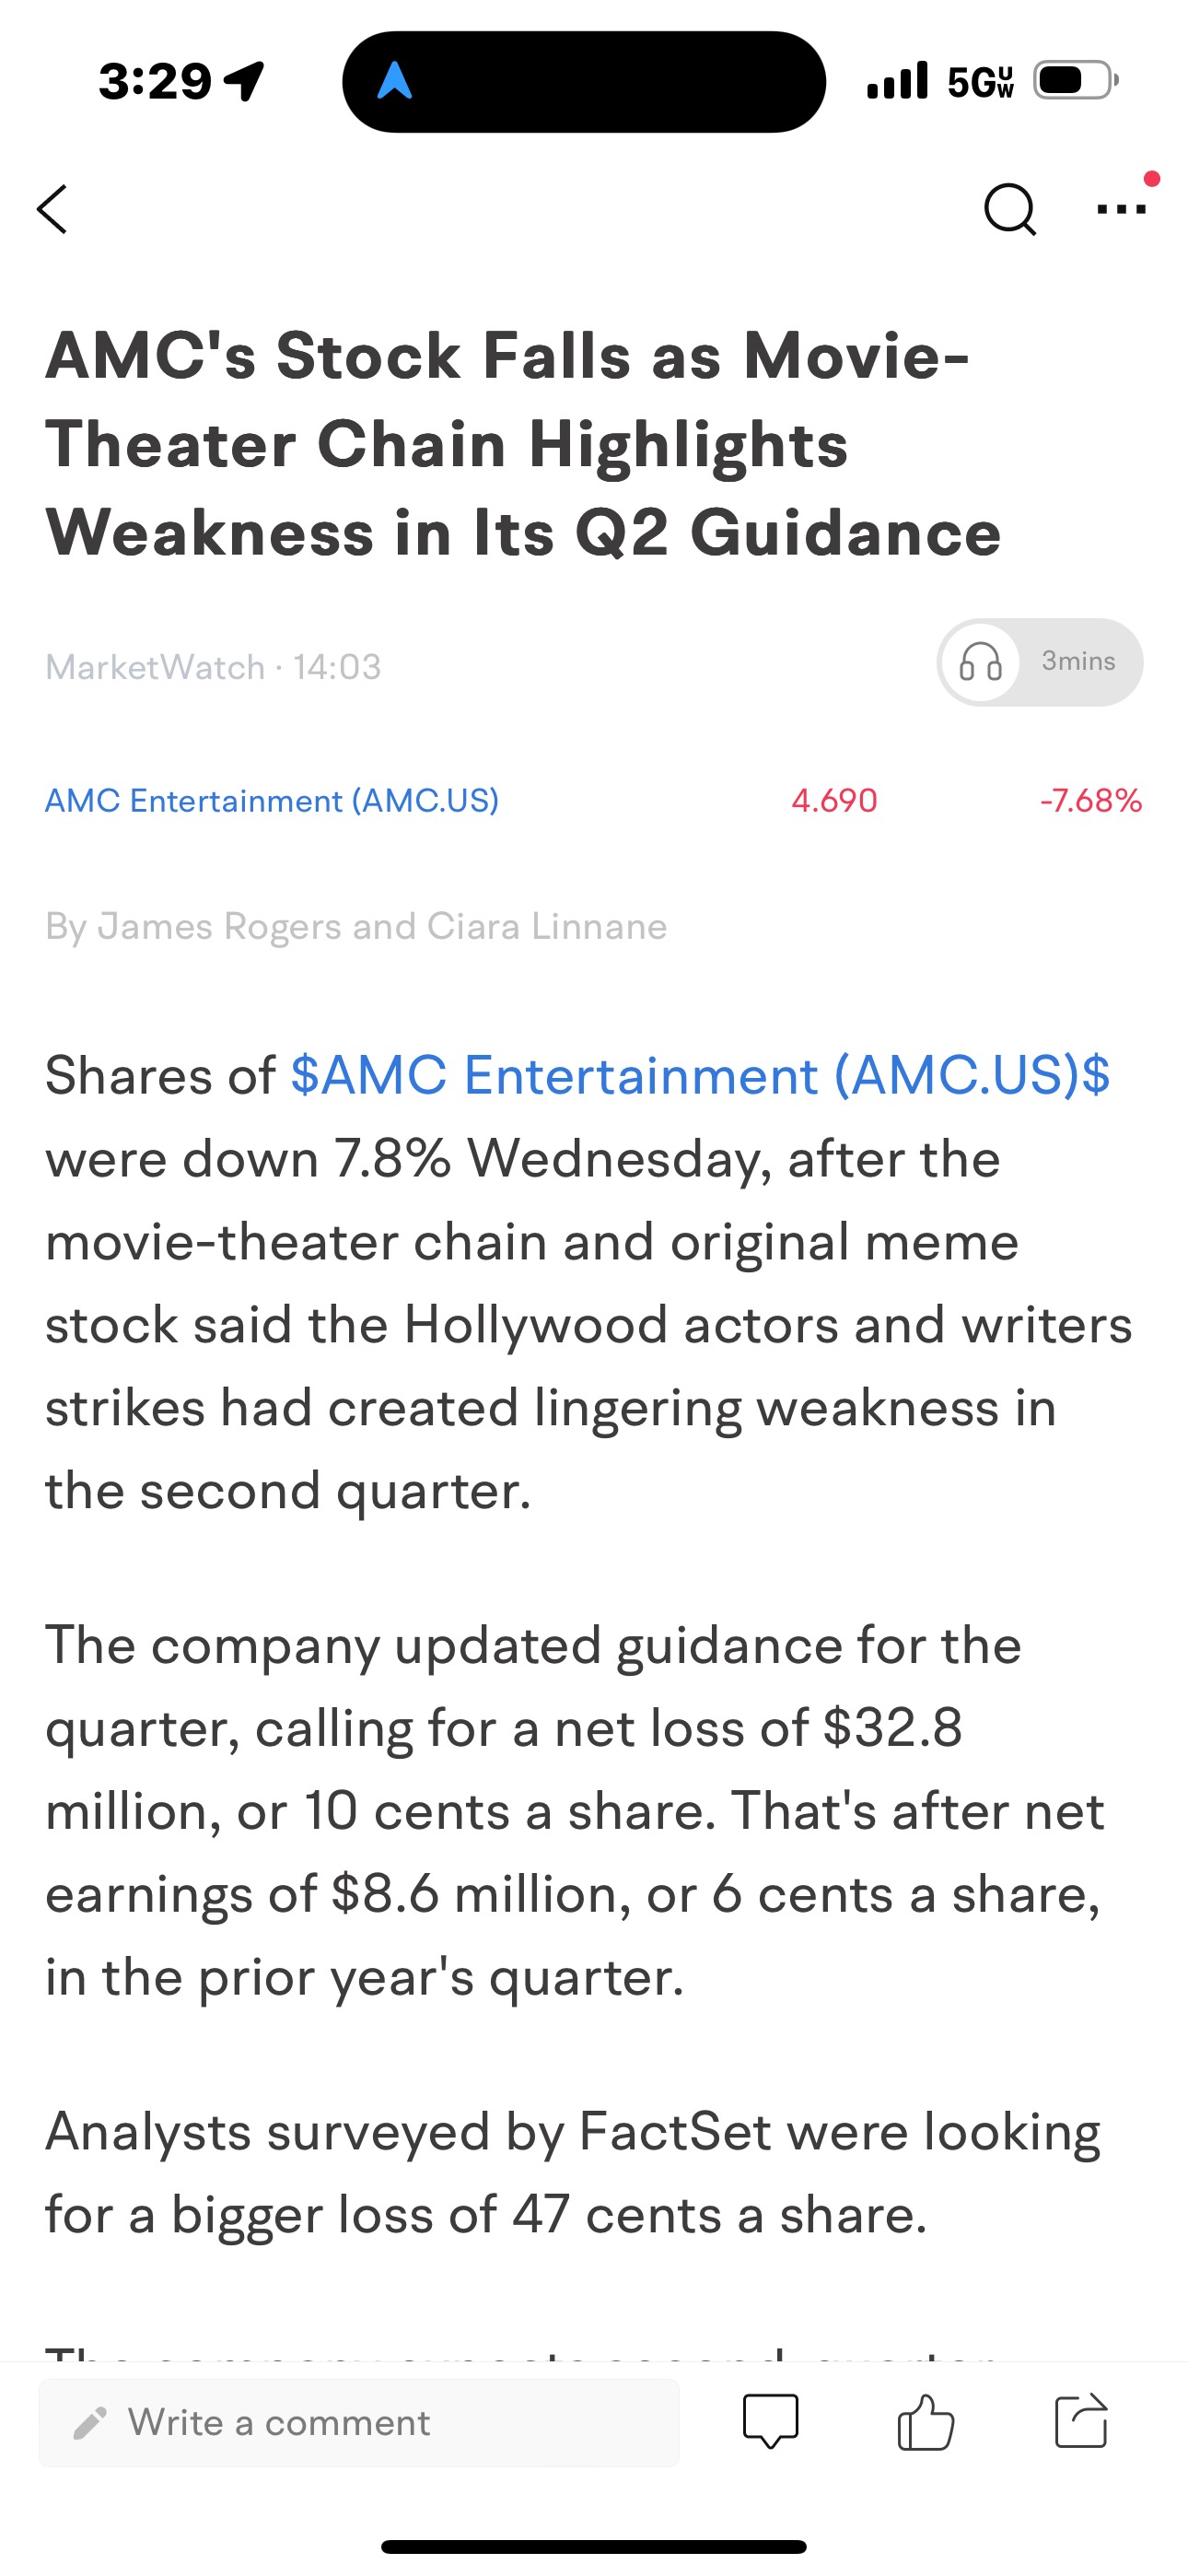 Not looking good for AMC